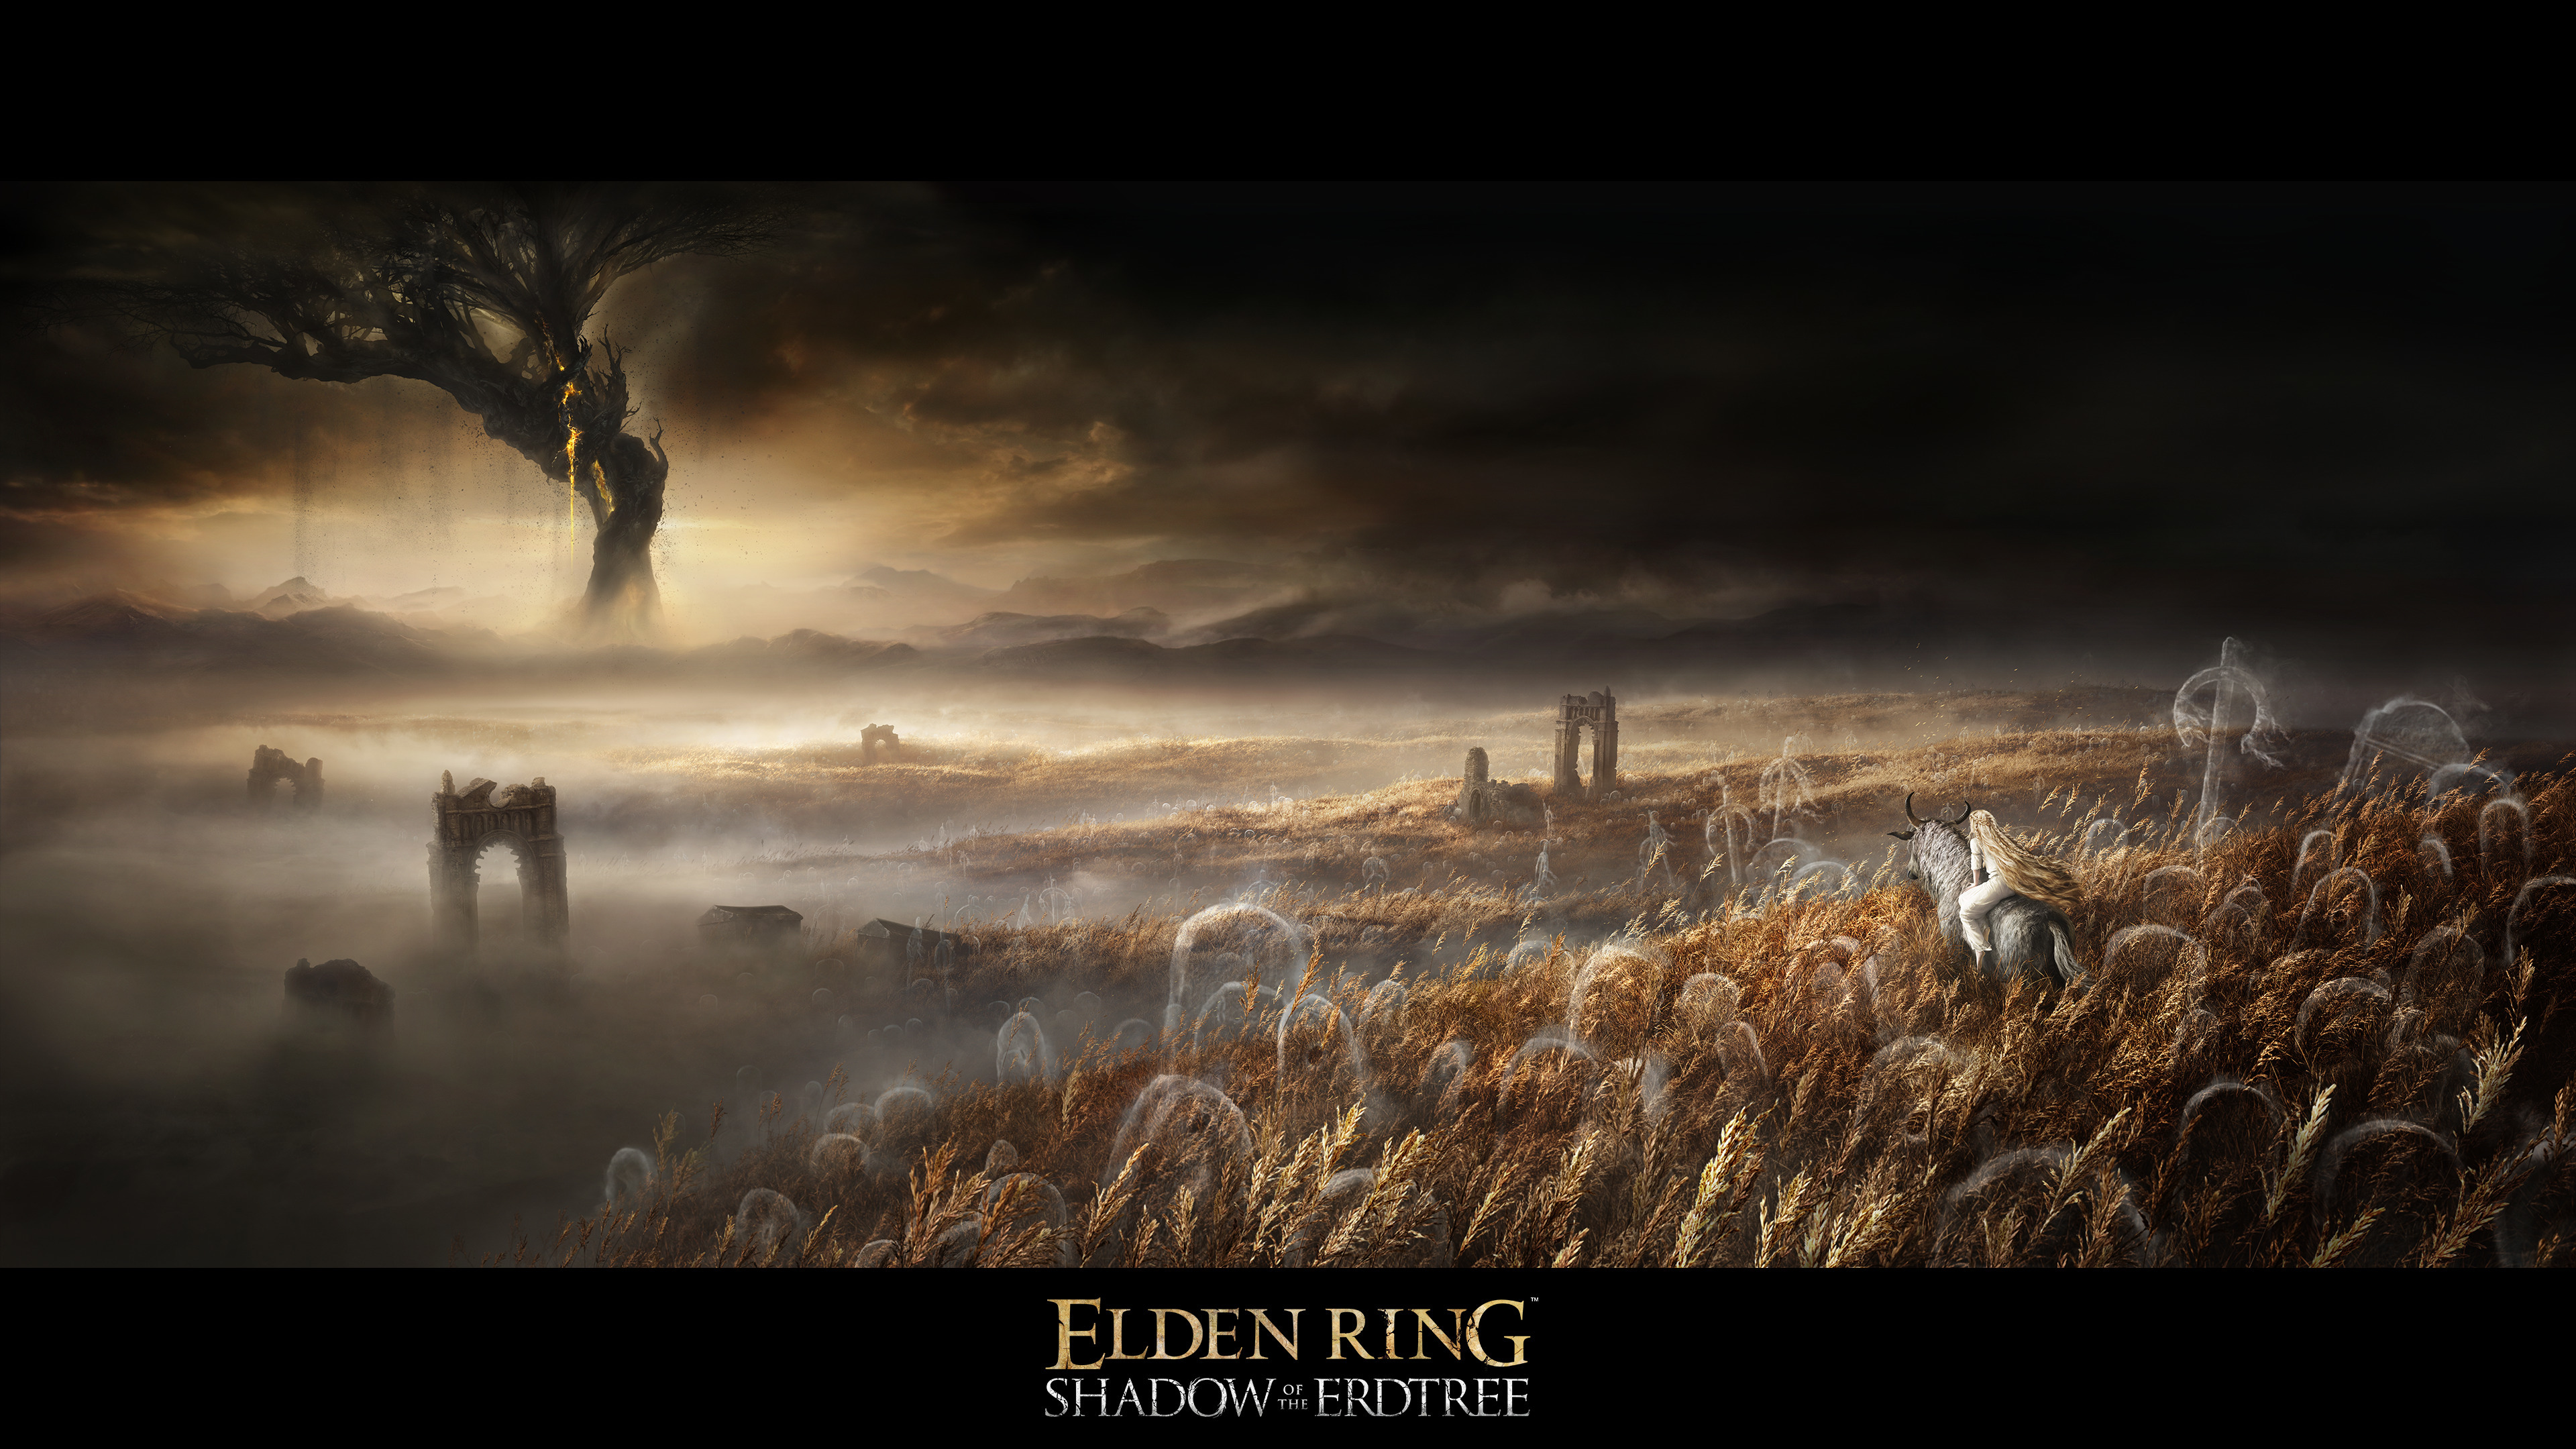 Surprise announcement of the Elden Ring expansion, Shadows of the Eldtree